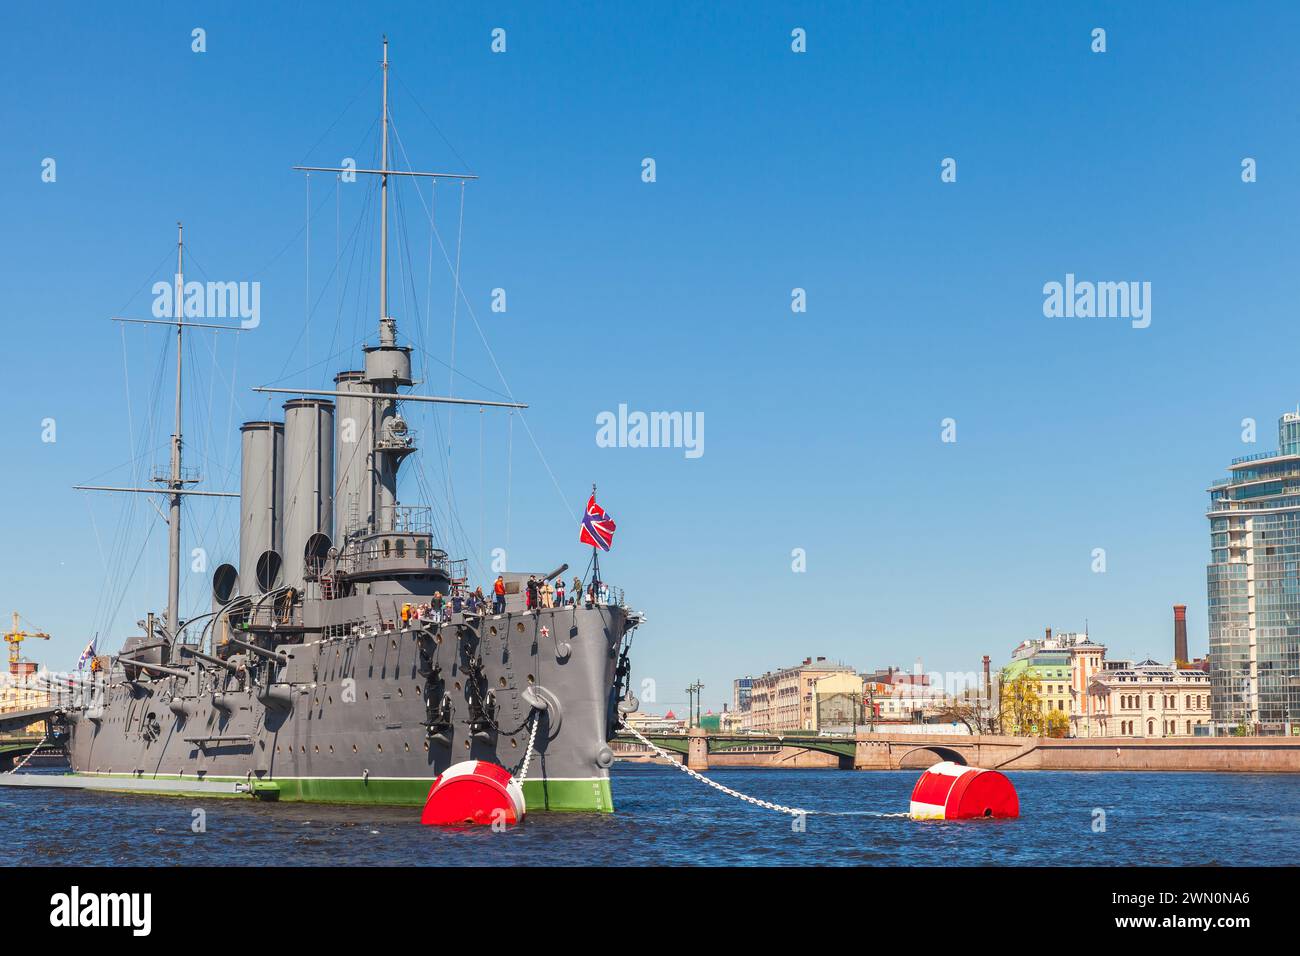 St-Petersburg, Russia - May 21, 2022: Aurora is a Russian protected cruiser, currently preserved as a museum ship is moored in Saint Petersburg, Russi Stock Photo